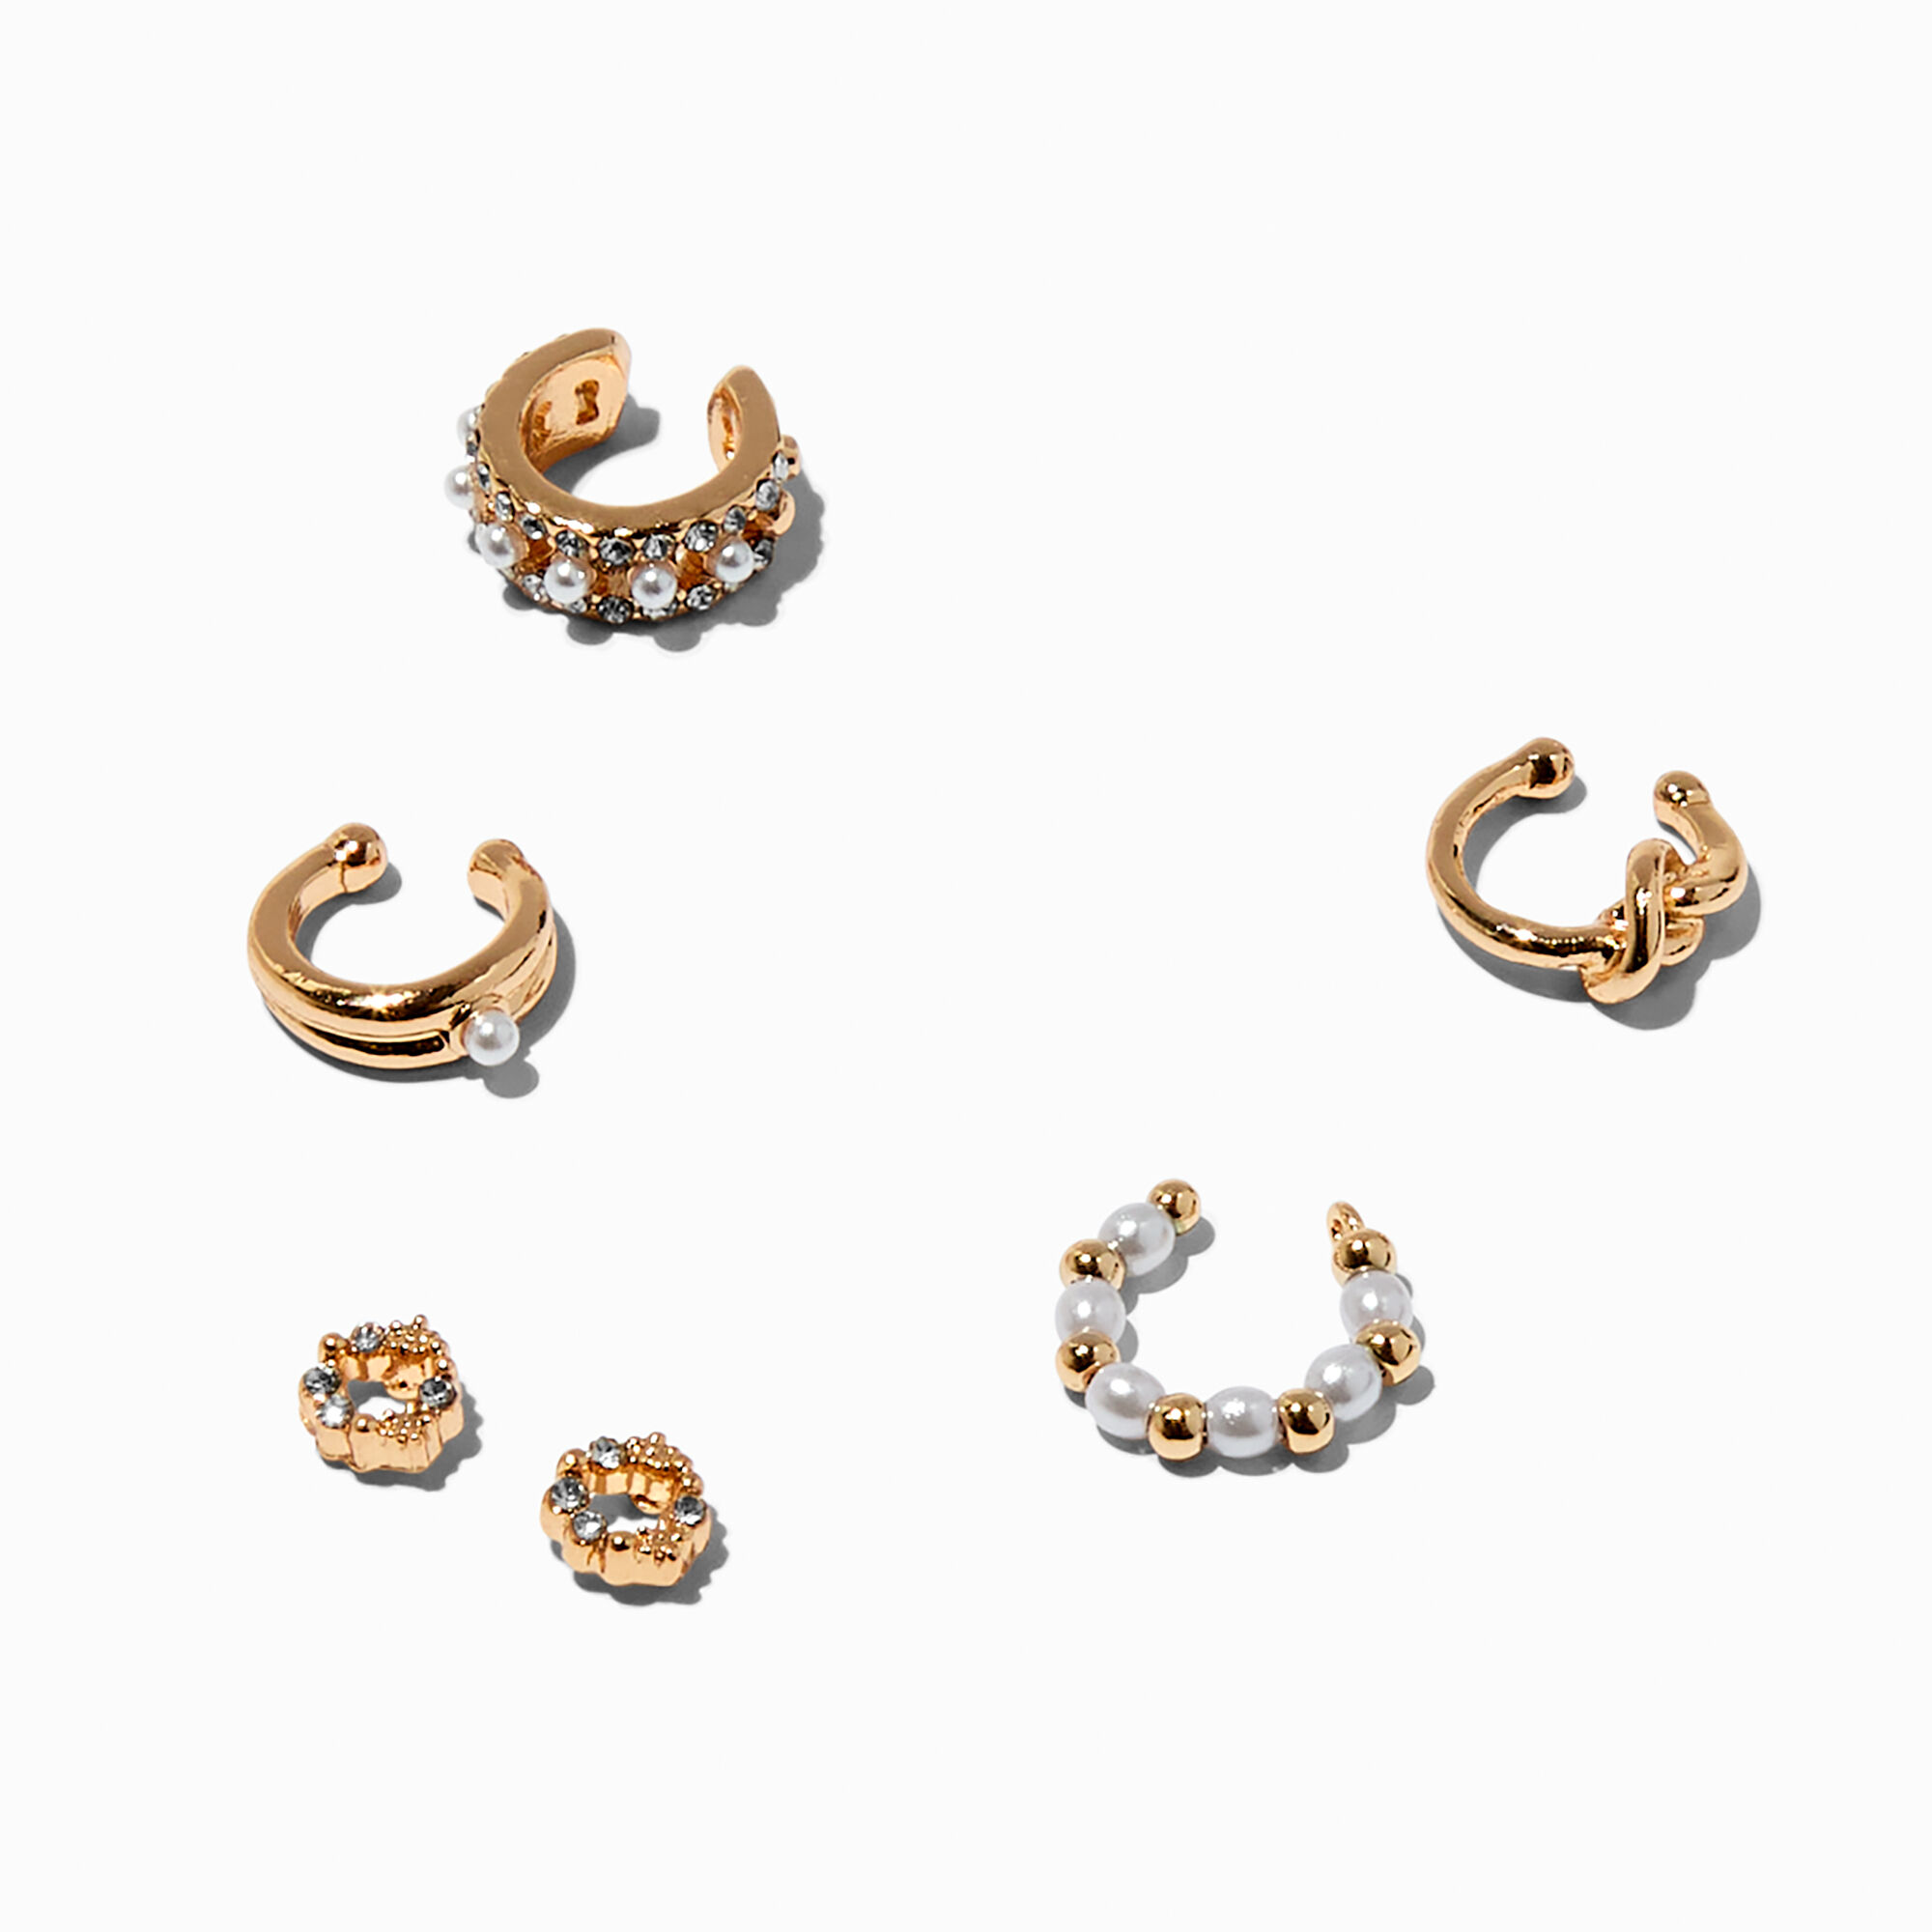 View Claires Tone Circle Stud Ear Cuff Earrings Stackables 6 Pack Gold information